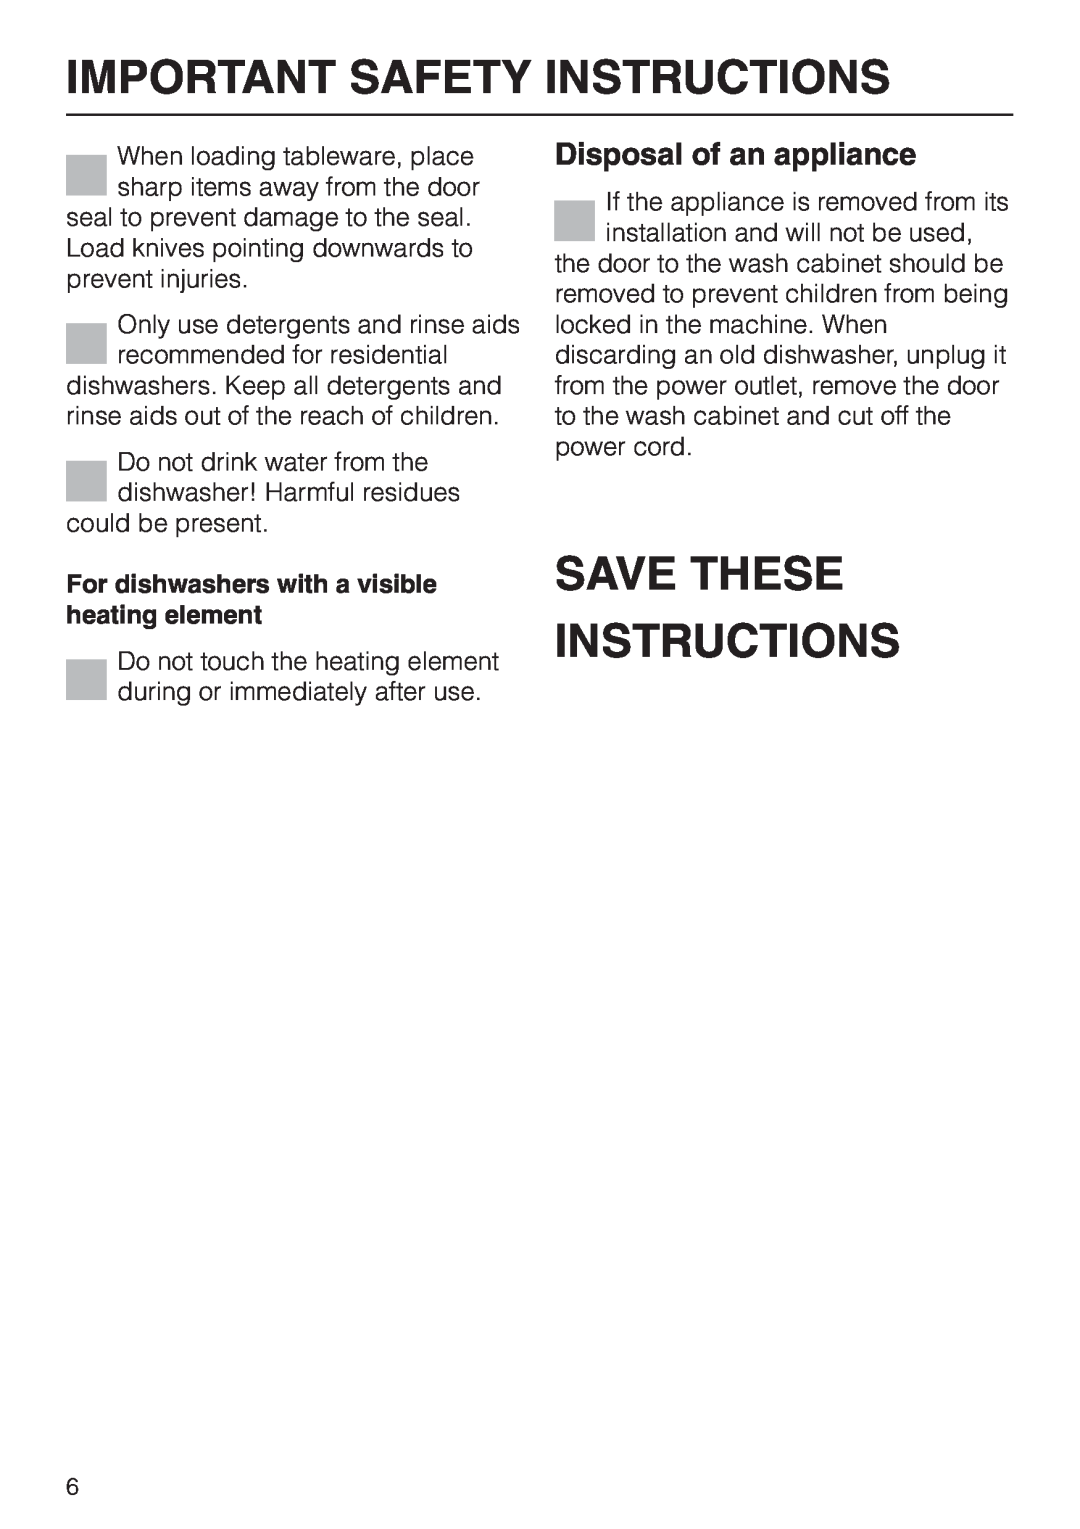 Miele HG01 Save These Instructions, Disposal of an appliance, For dishwashers with a visible heating element 